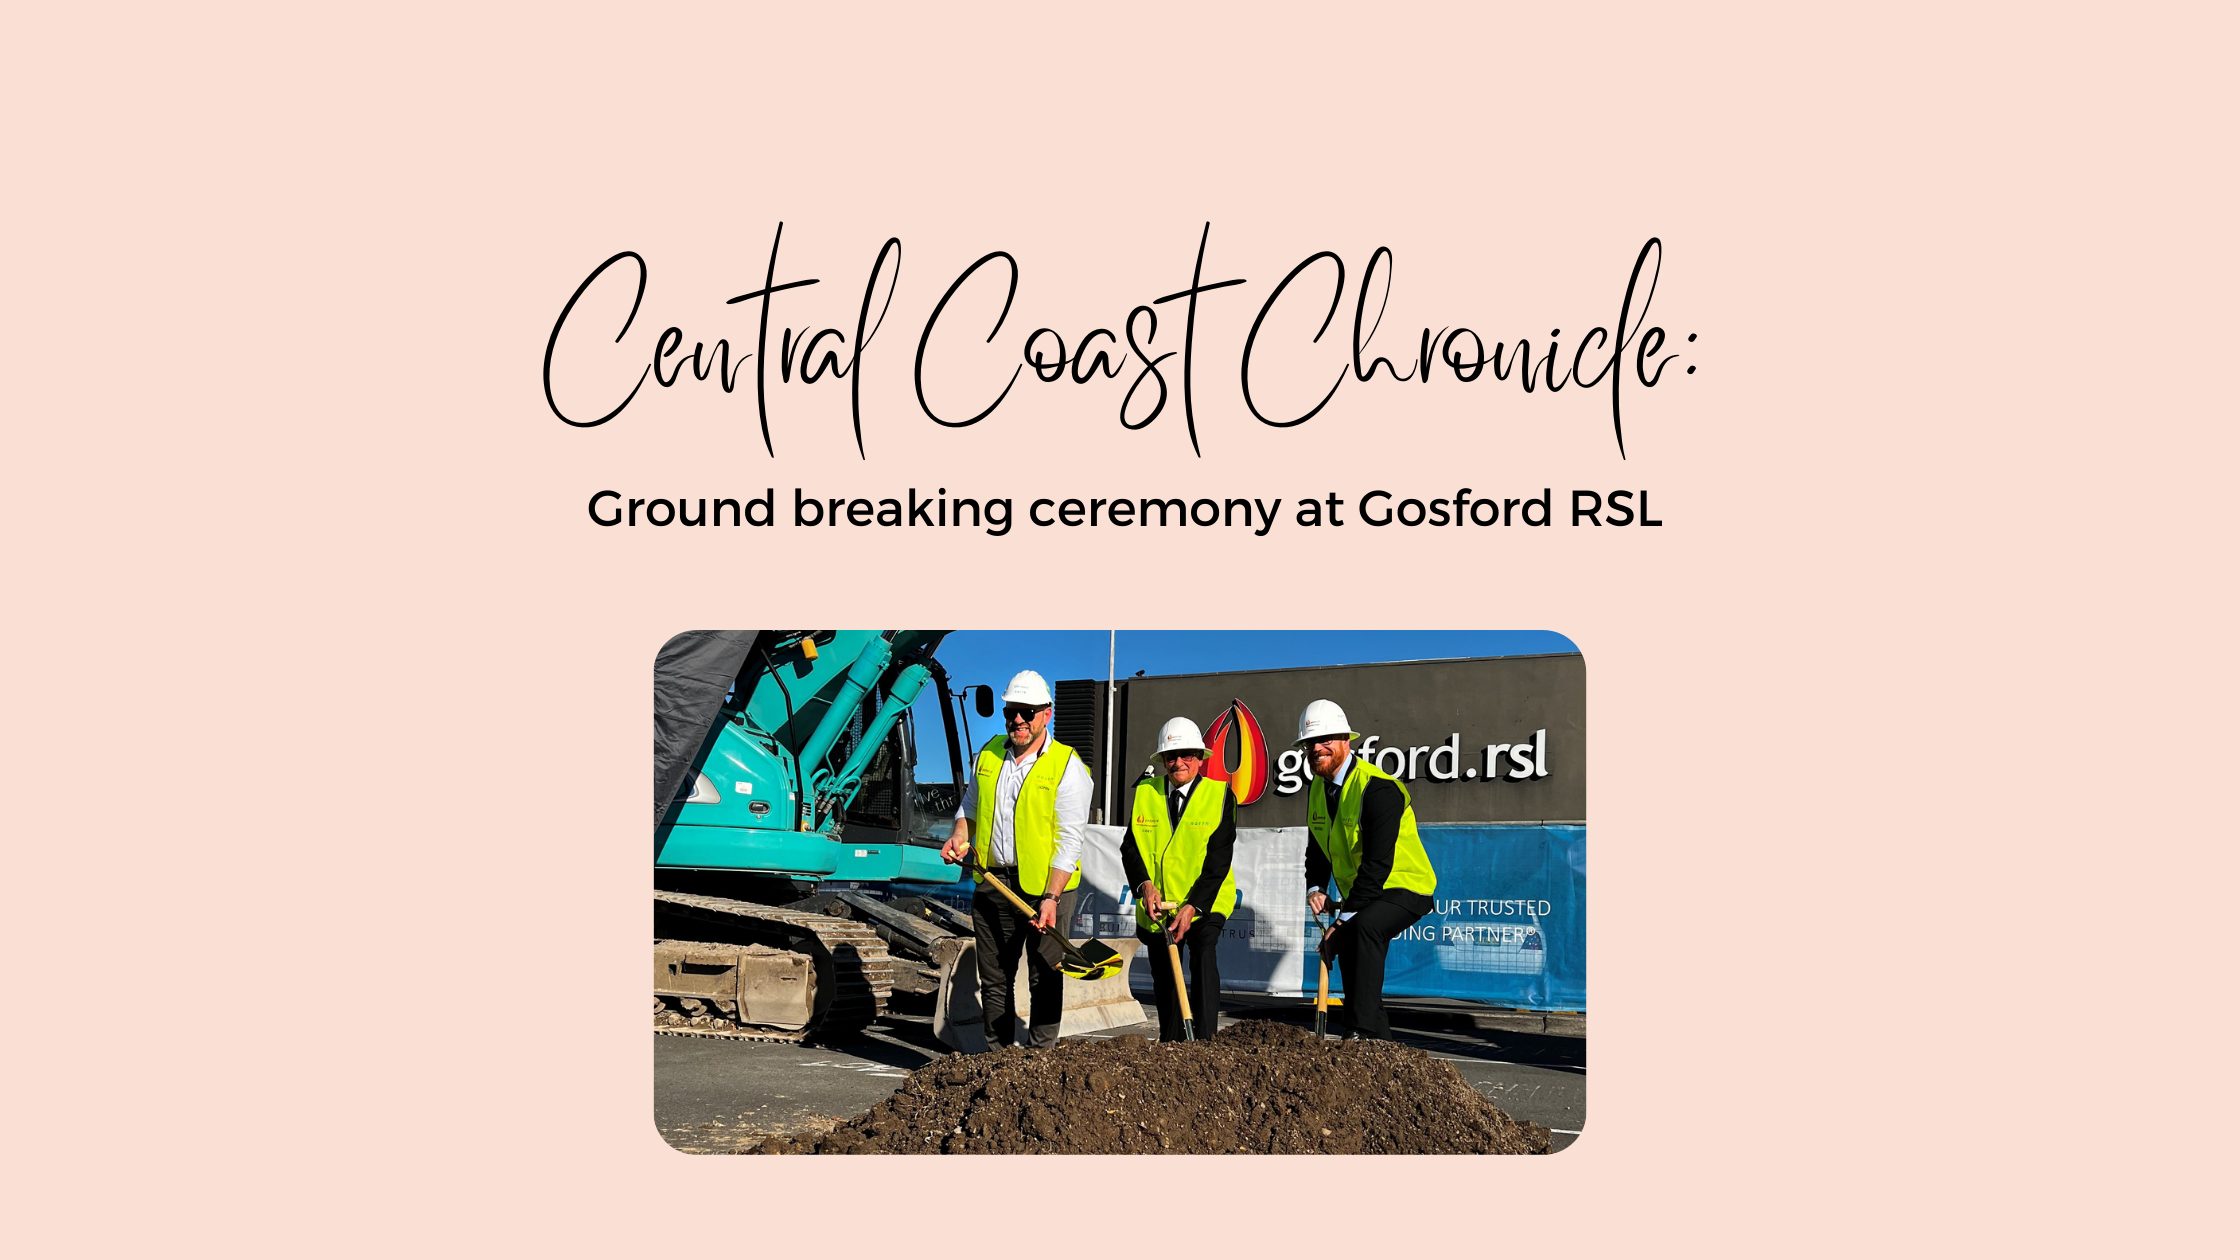 Ground breaking ceremony at Gosford RSL